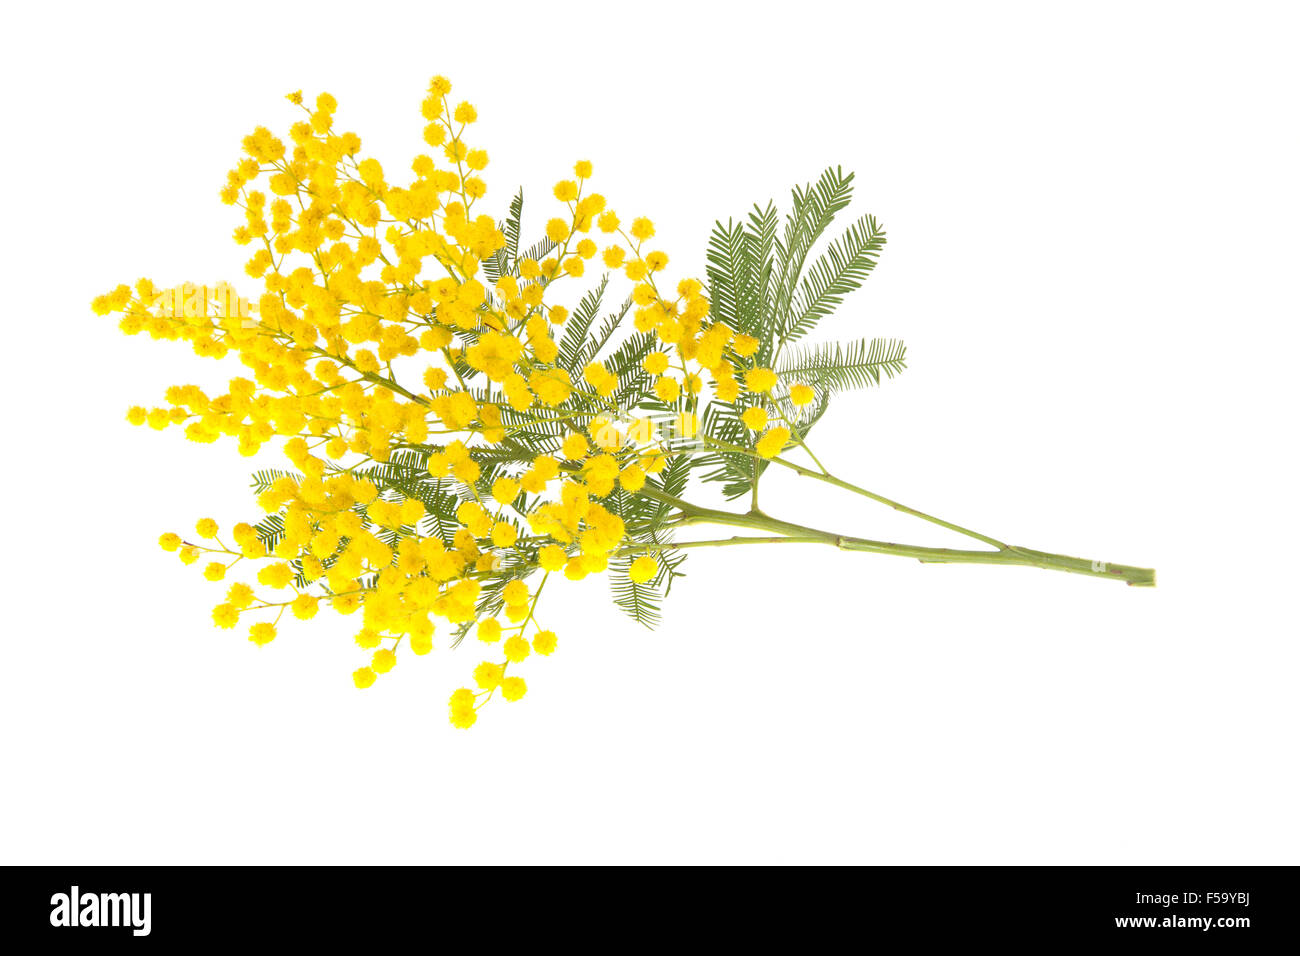 Wattle branch isolated on white. Wattle flowers in Italy is the symbol for the “Women's International Day'. Stock Photo